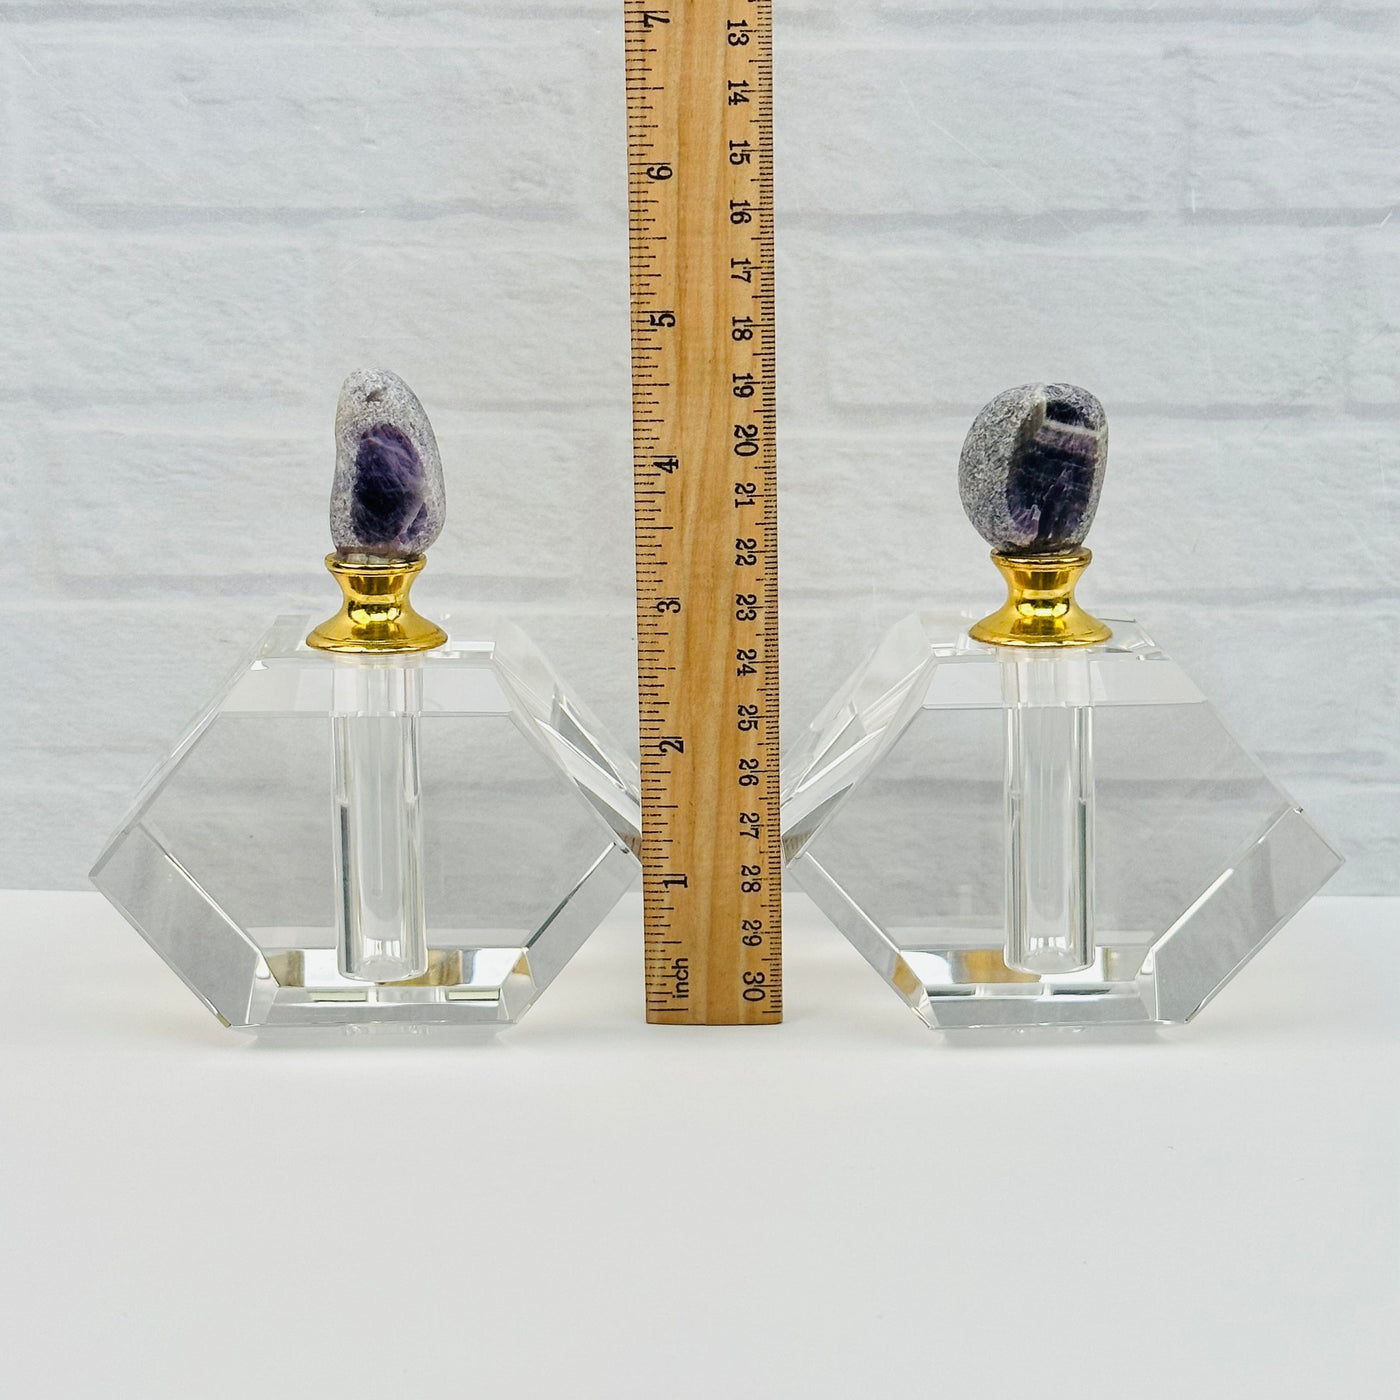 perfume bottles next to a ruler for size reference 